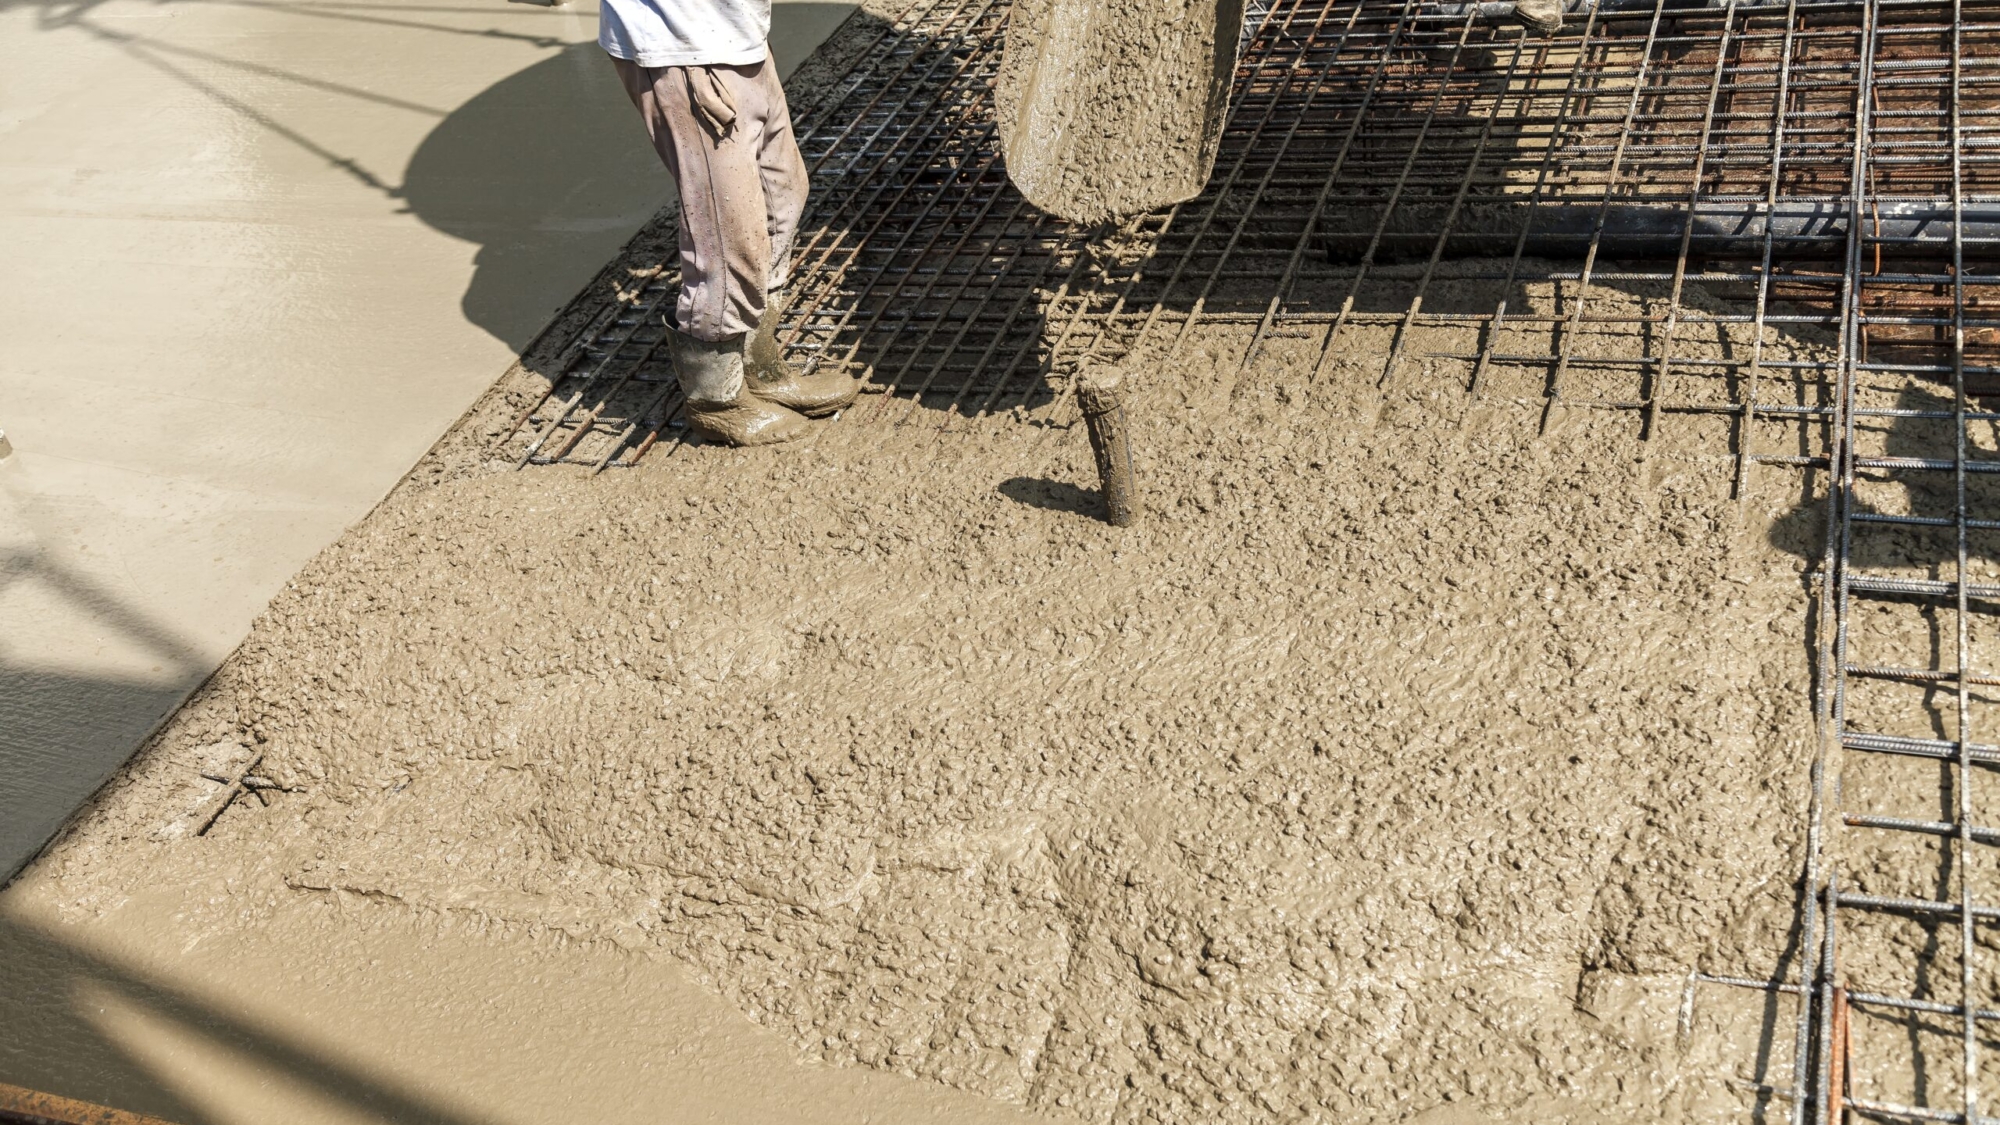 Discover how to find the best ready mixed concrete near you. Explore valuable insights, expert advice, and industry trends in our blog post. Partner with Gott Marketing to find the top ready mixed concrete suppliers in your area.